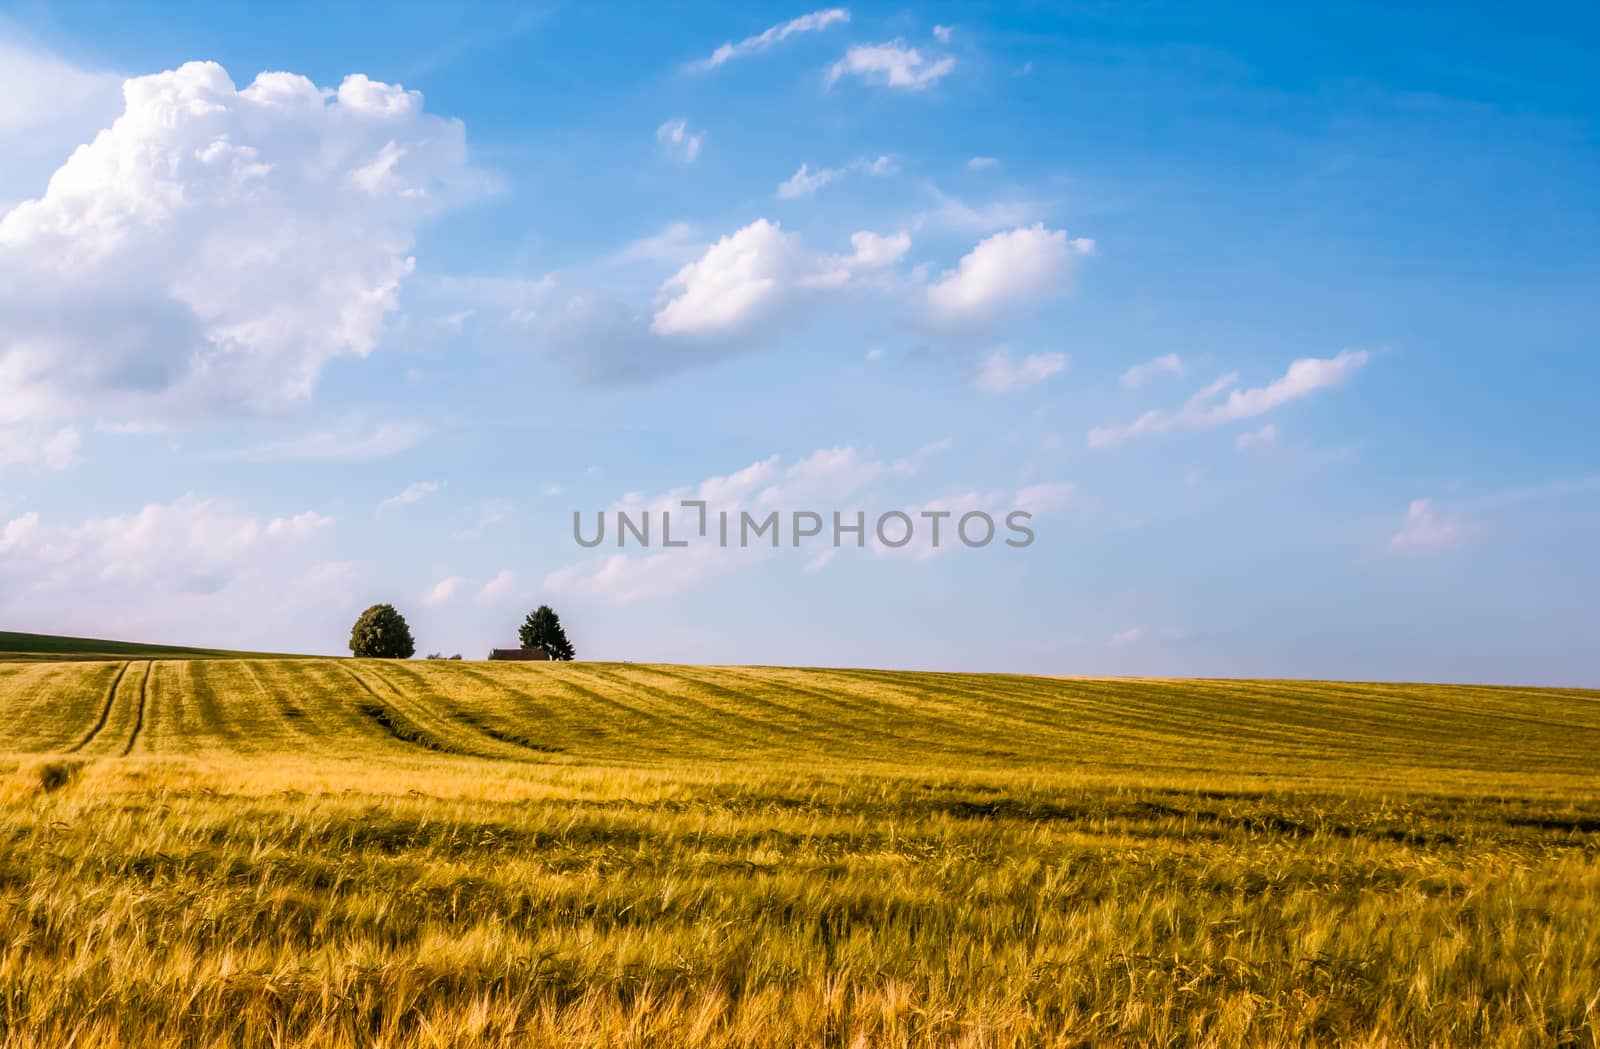 Meadow with intensive golden shining oat in front of a blue sky with white clouds and trees on the horizon